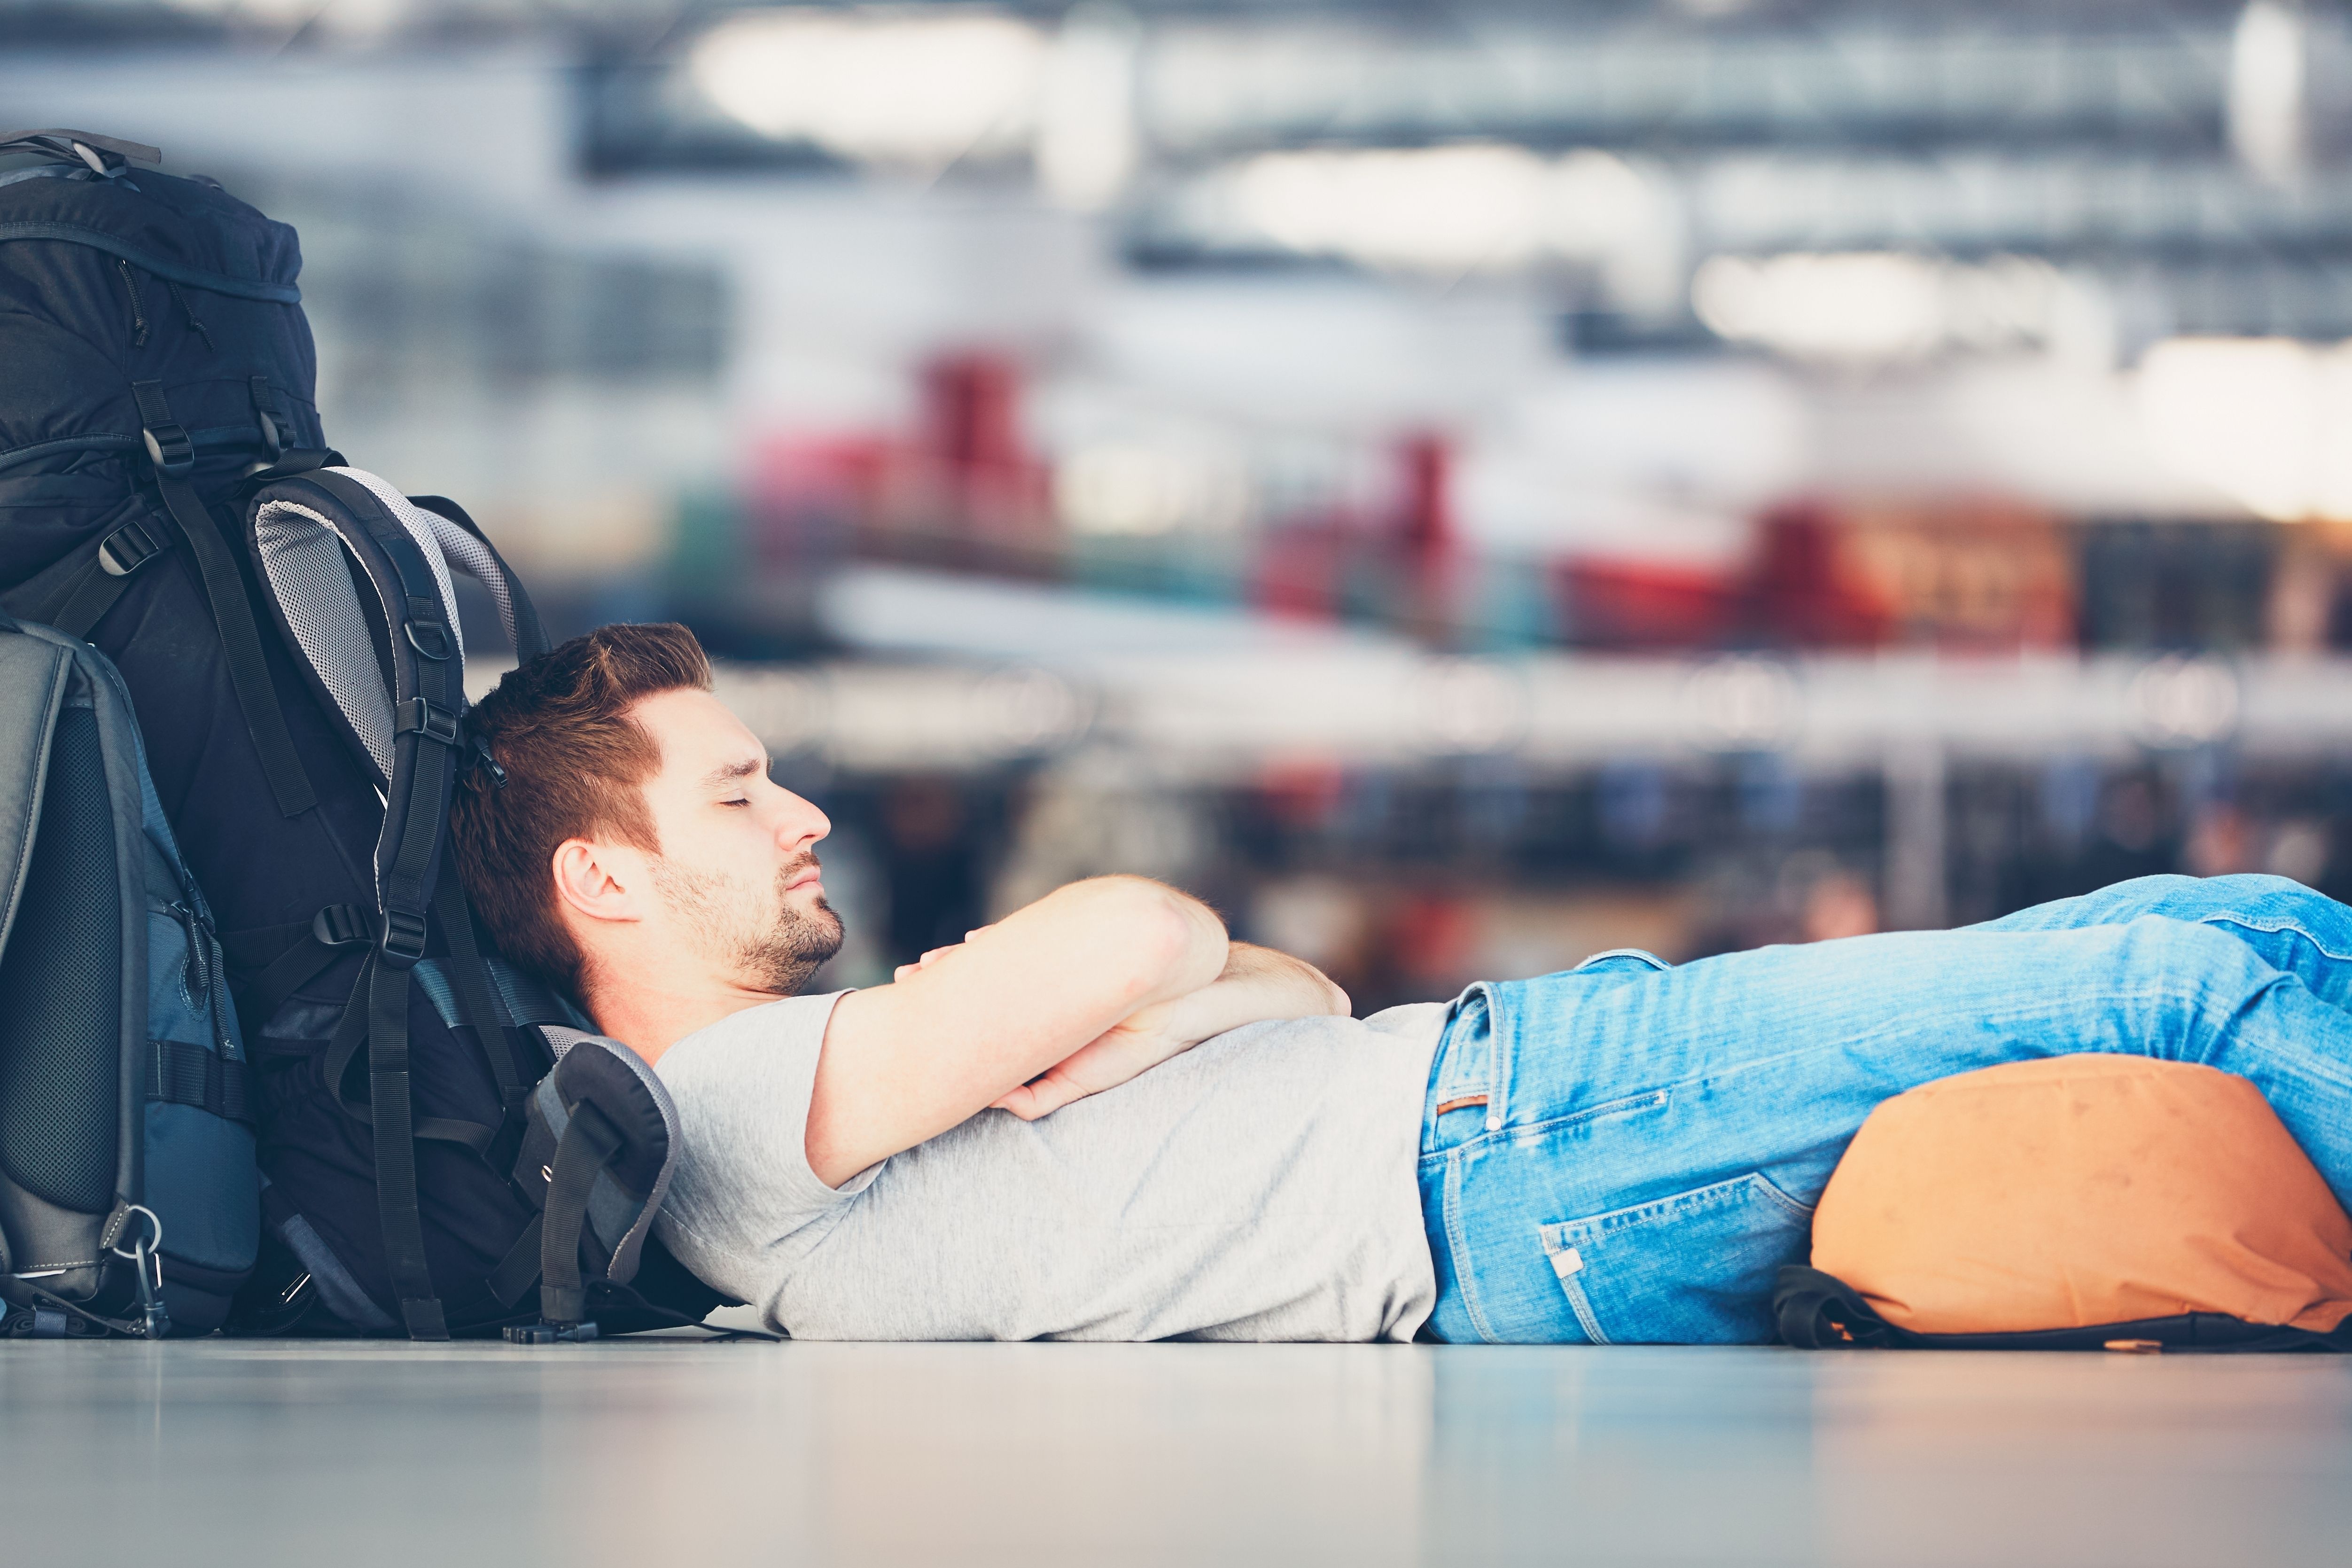 A man sleeping with his luggage in an airport terminal. 